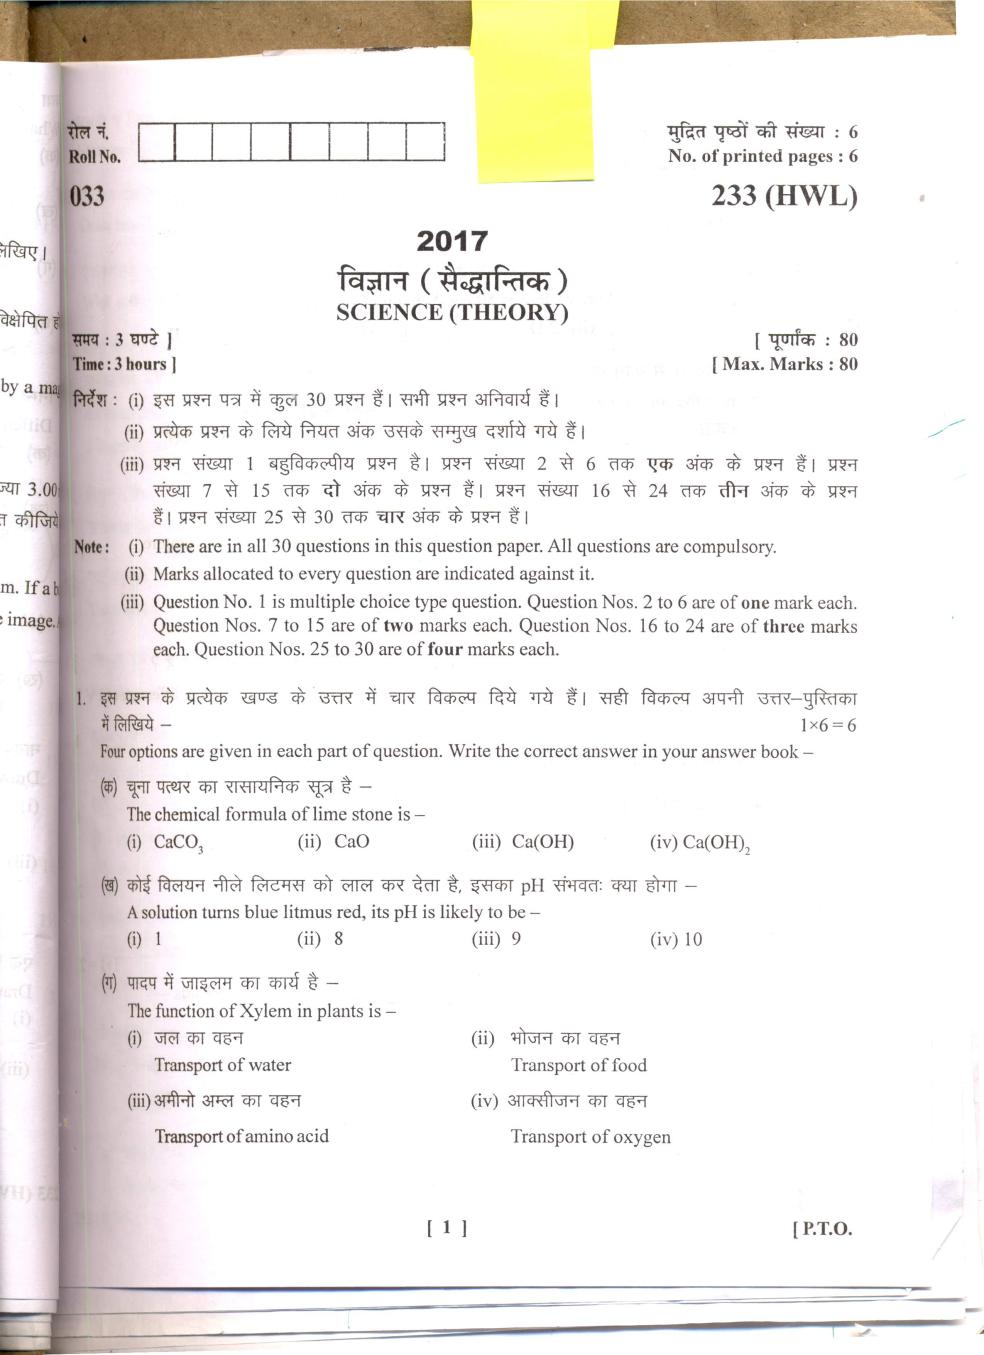 Uttarakhand Board Class 10 Question Paper 2017 for Science-2 - Page 1